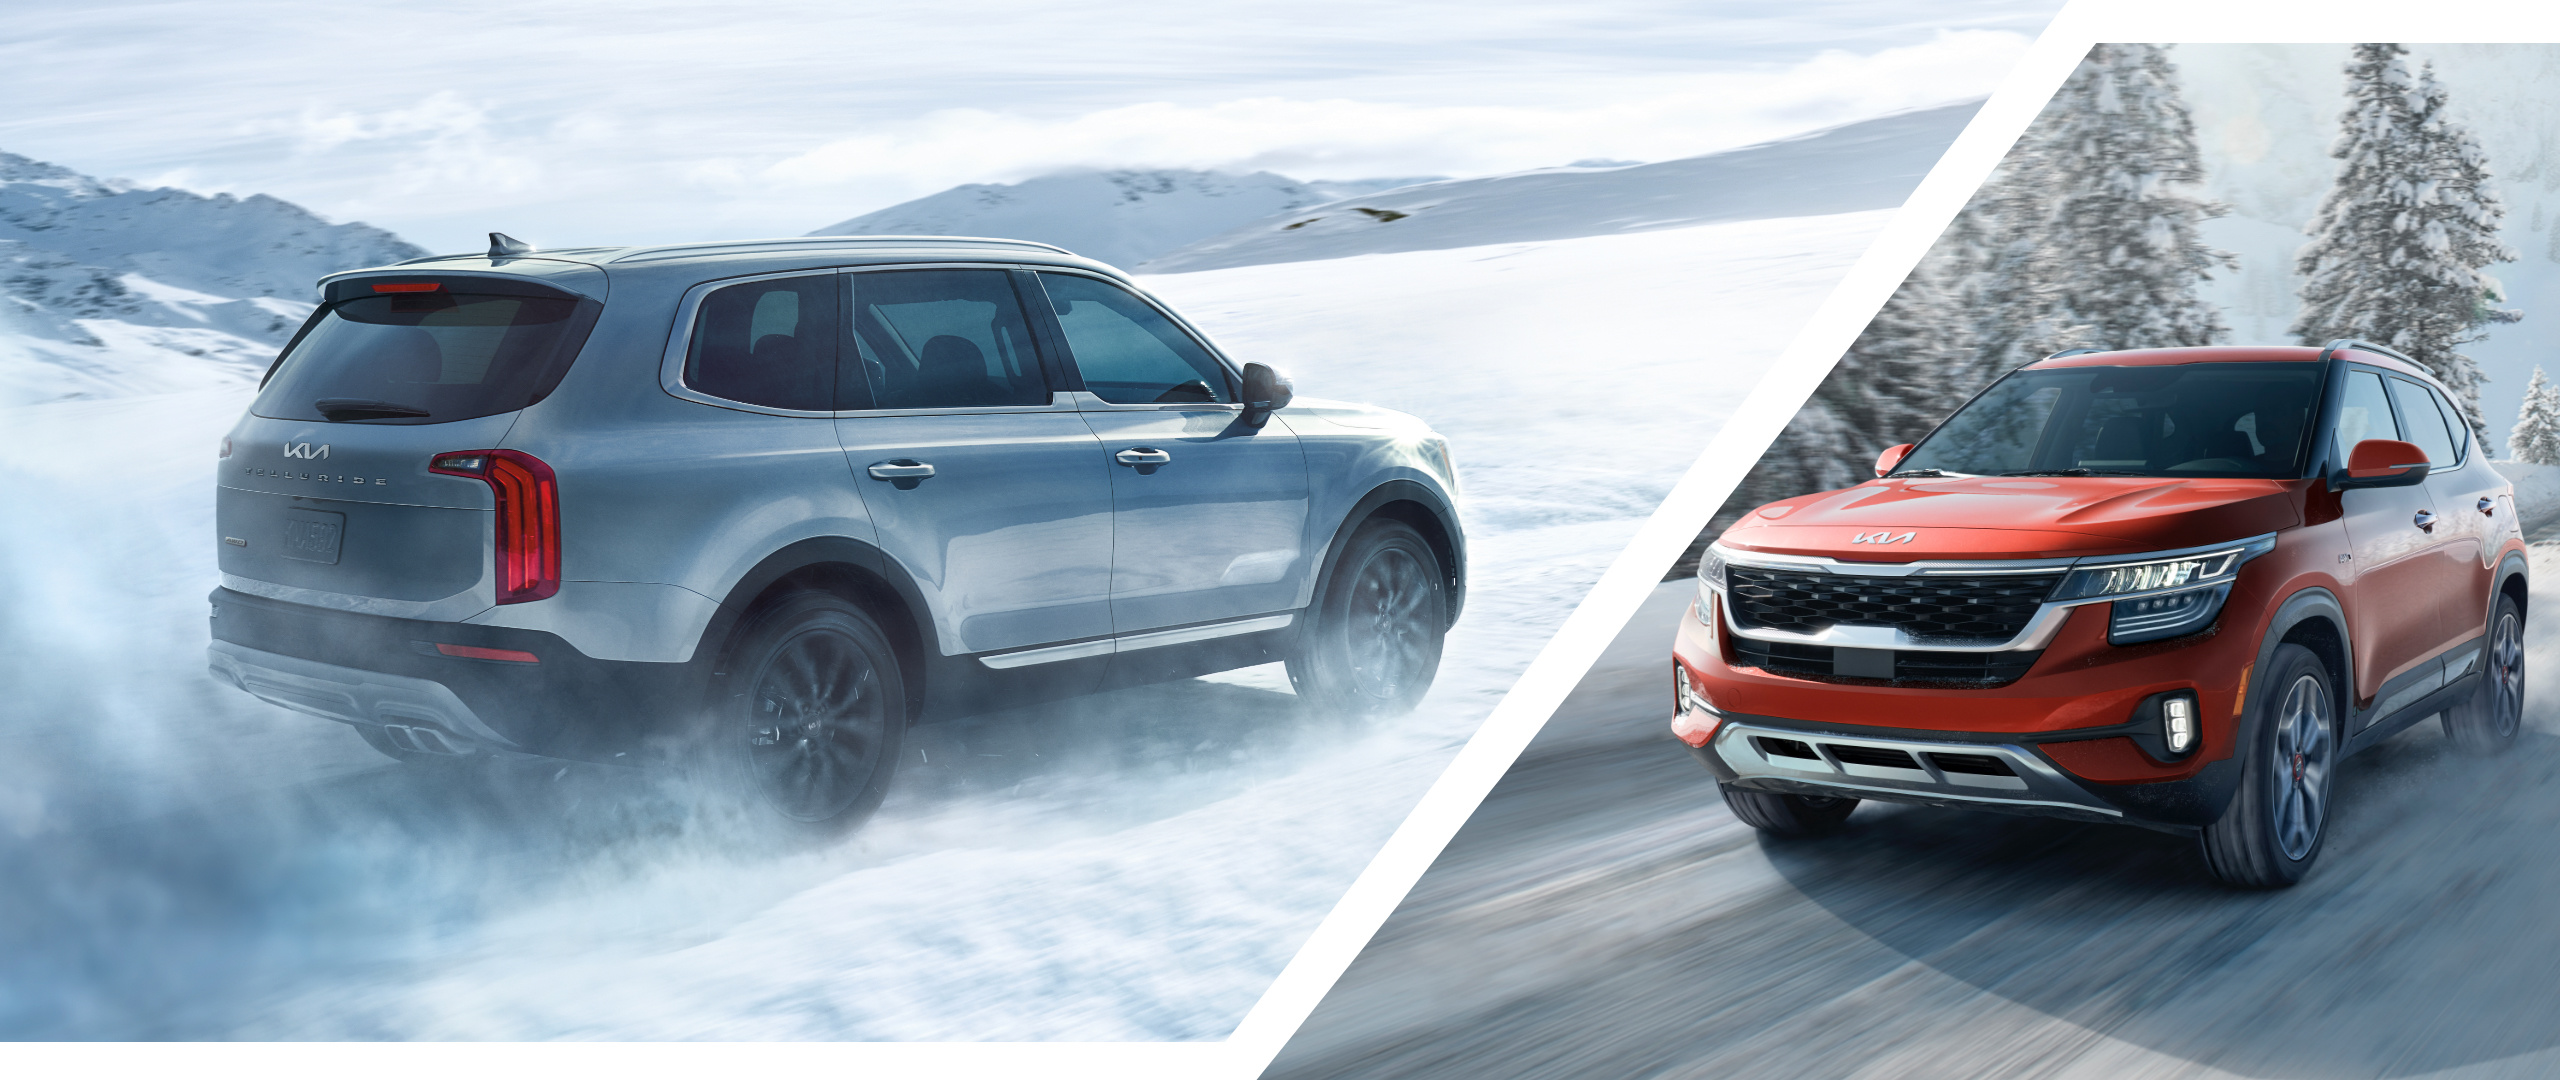 2022 Kia Telluride And 2022 Kia Seltos Driving In Snowy Conditions With All-Wheel Drive